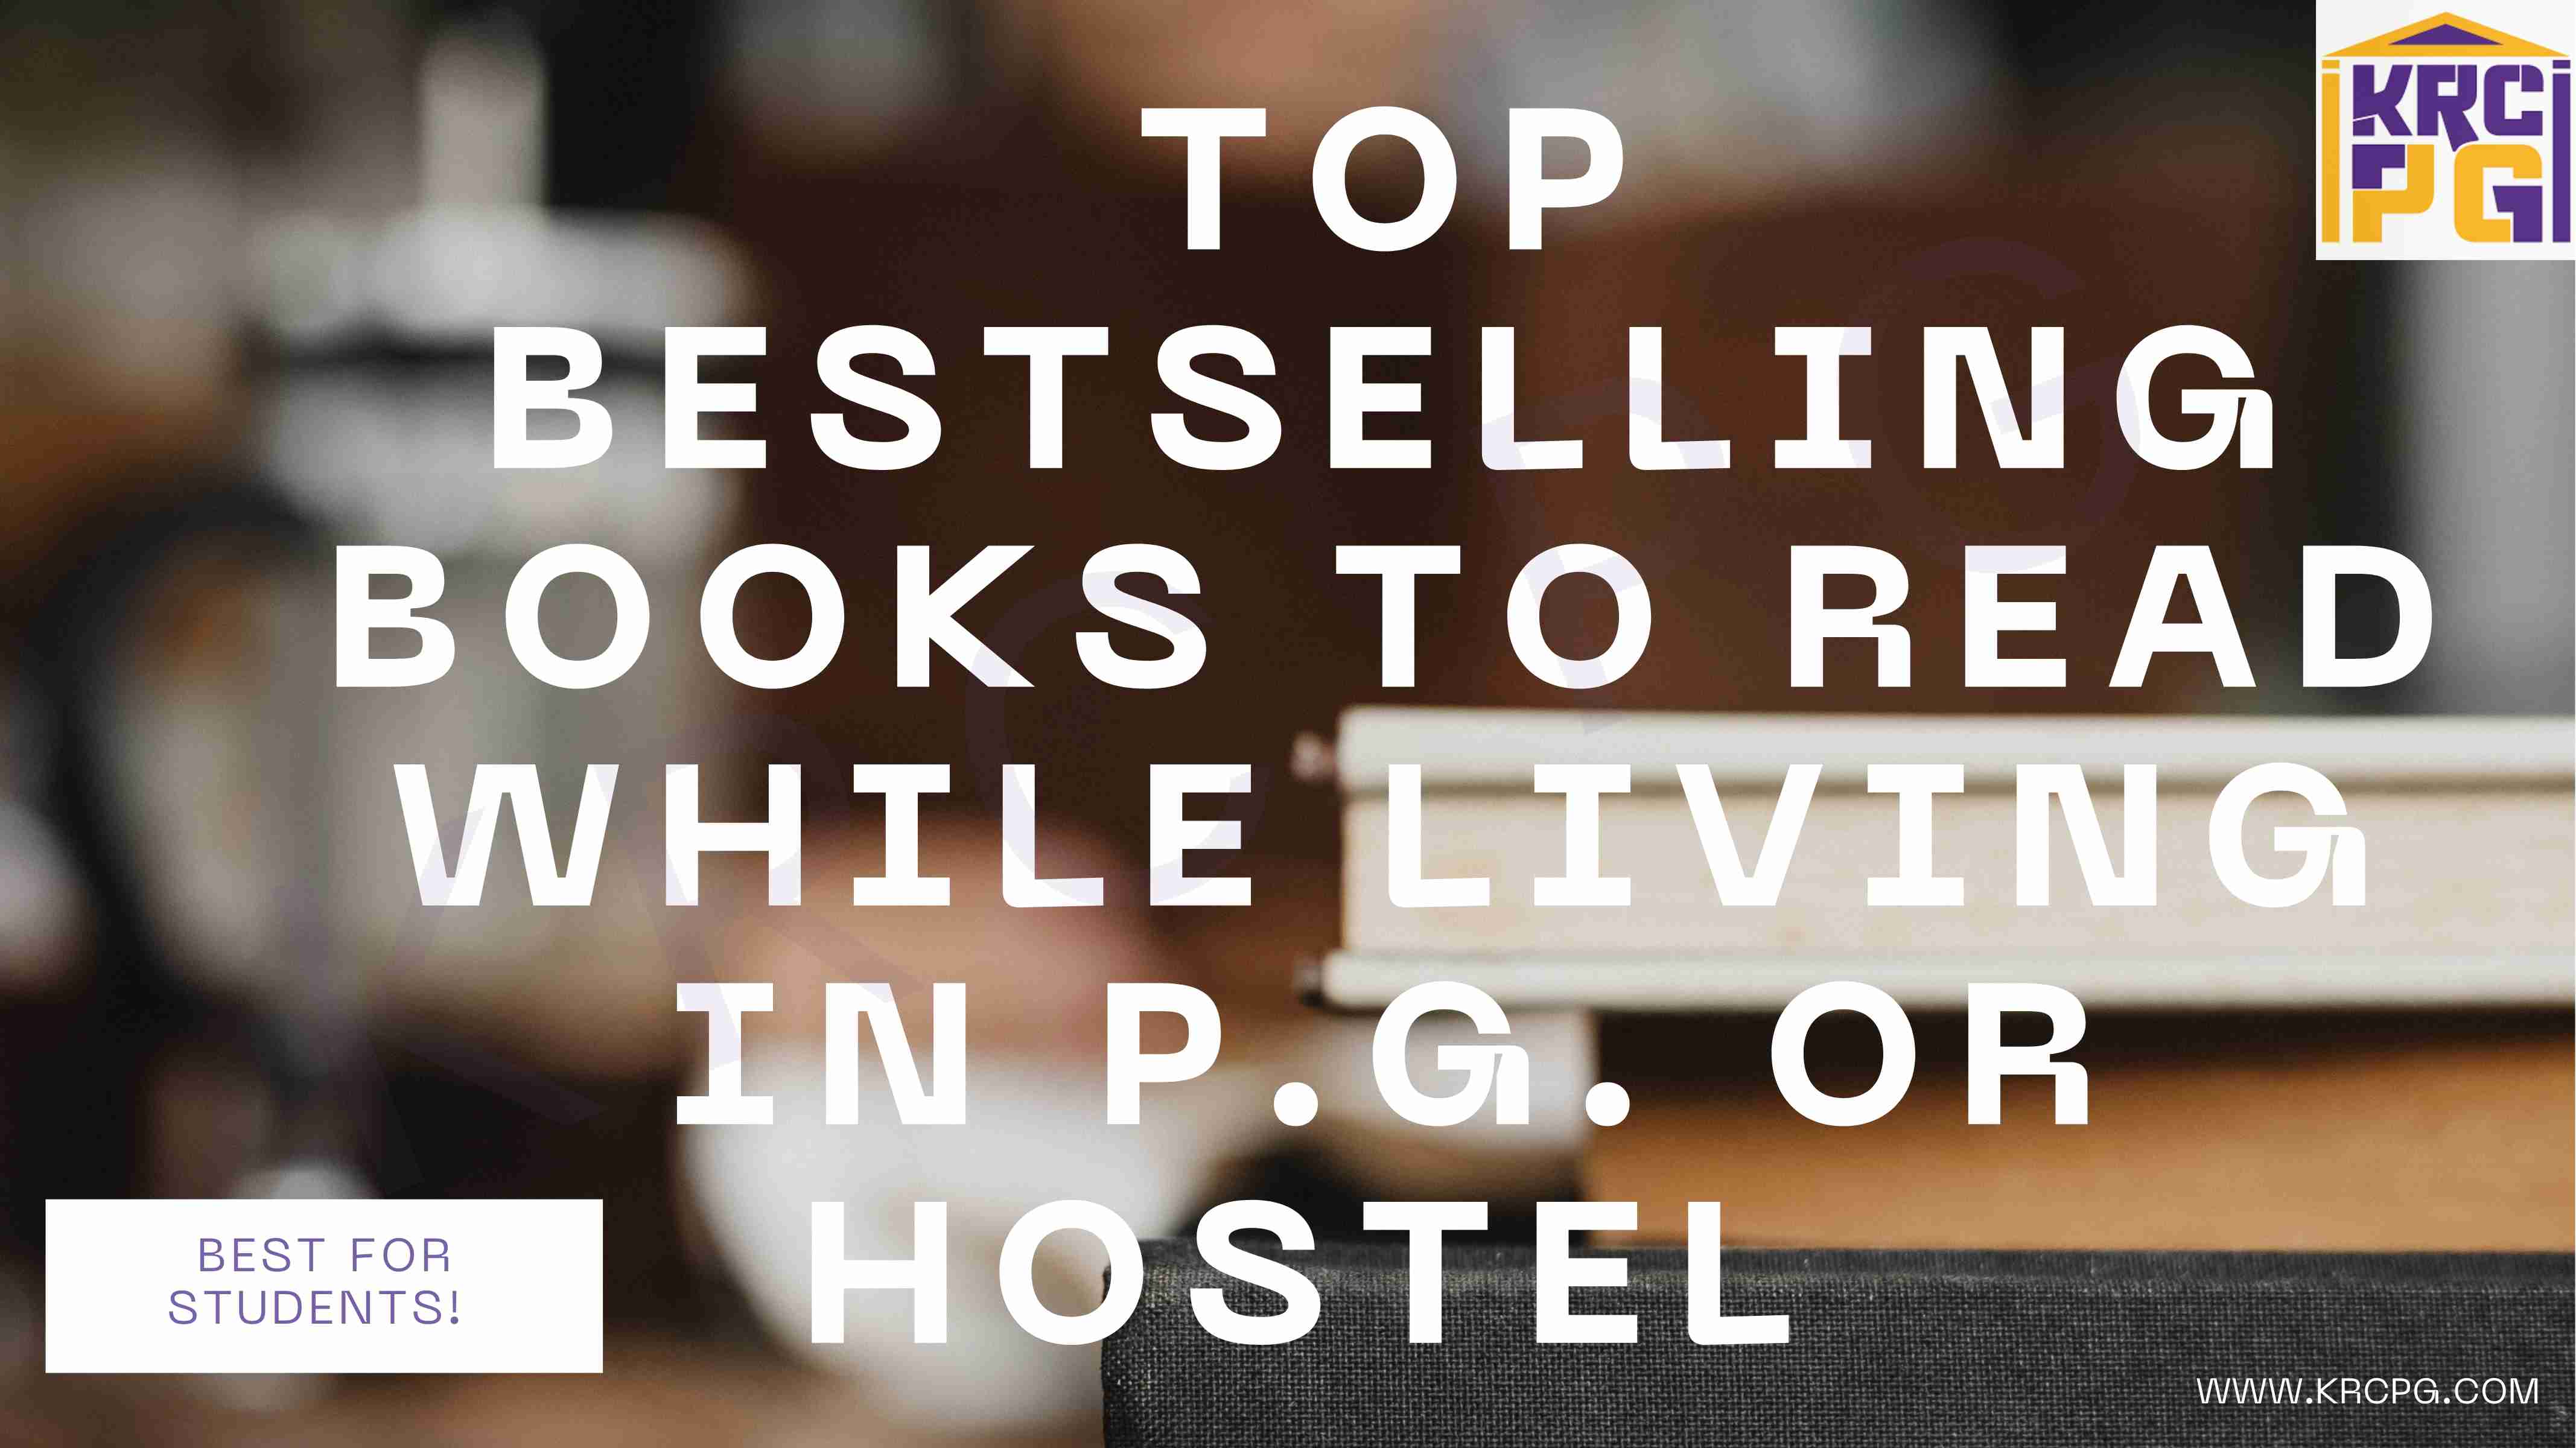 TOP BESTSELLING BOOKS TO READ WHILE LIVING IN A P.G. OR HOSTEL